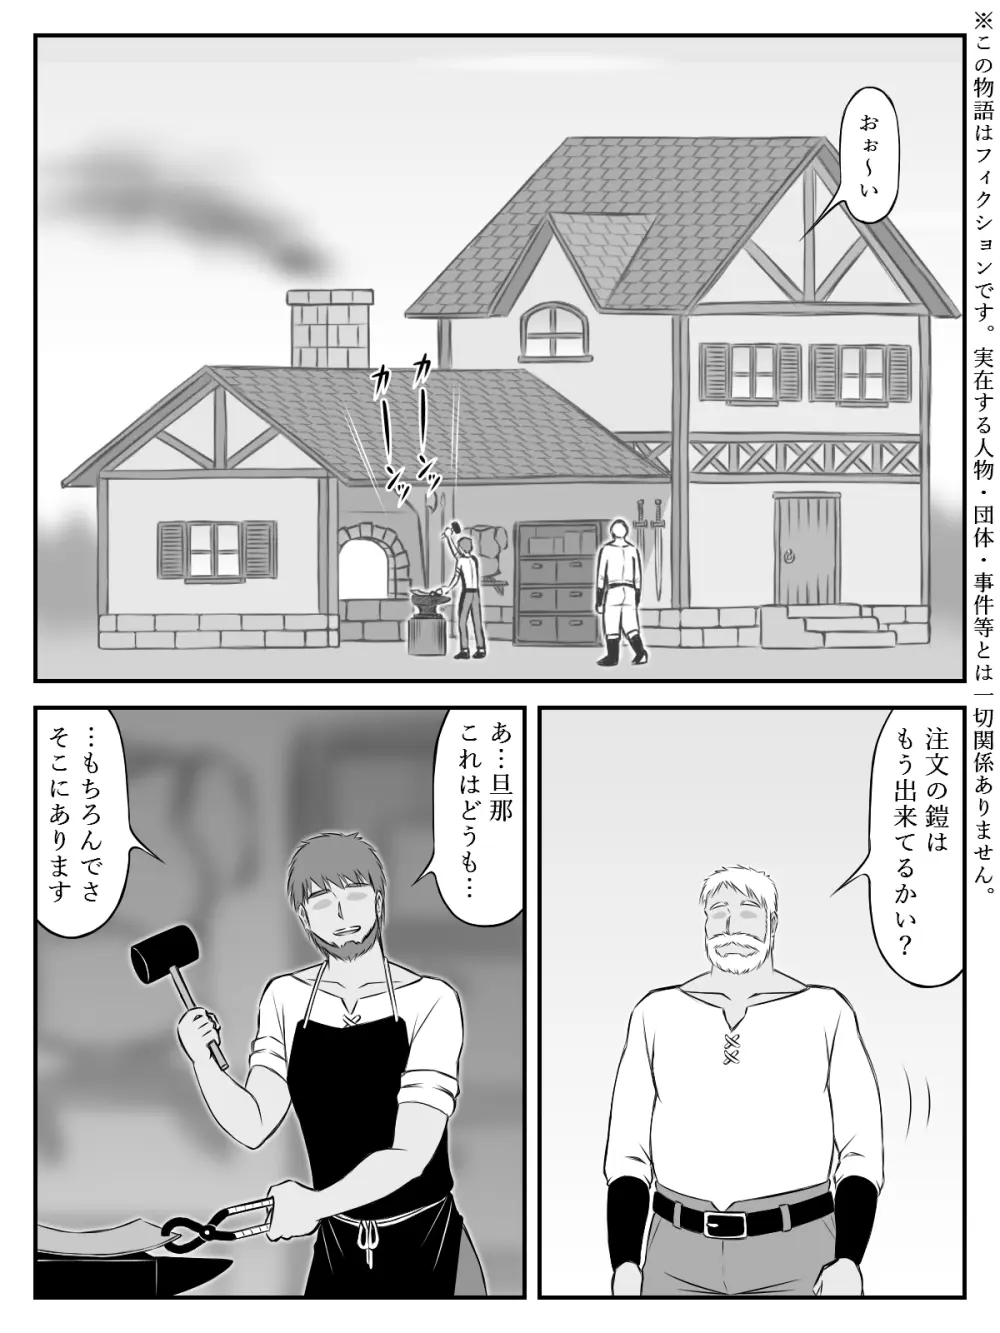 [SiD - Sato in Dreams -] 爆乳(おっぱい)と胸甲(アーマー) - page2